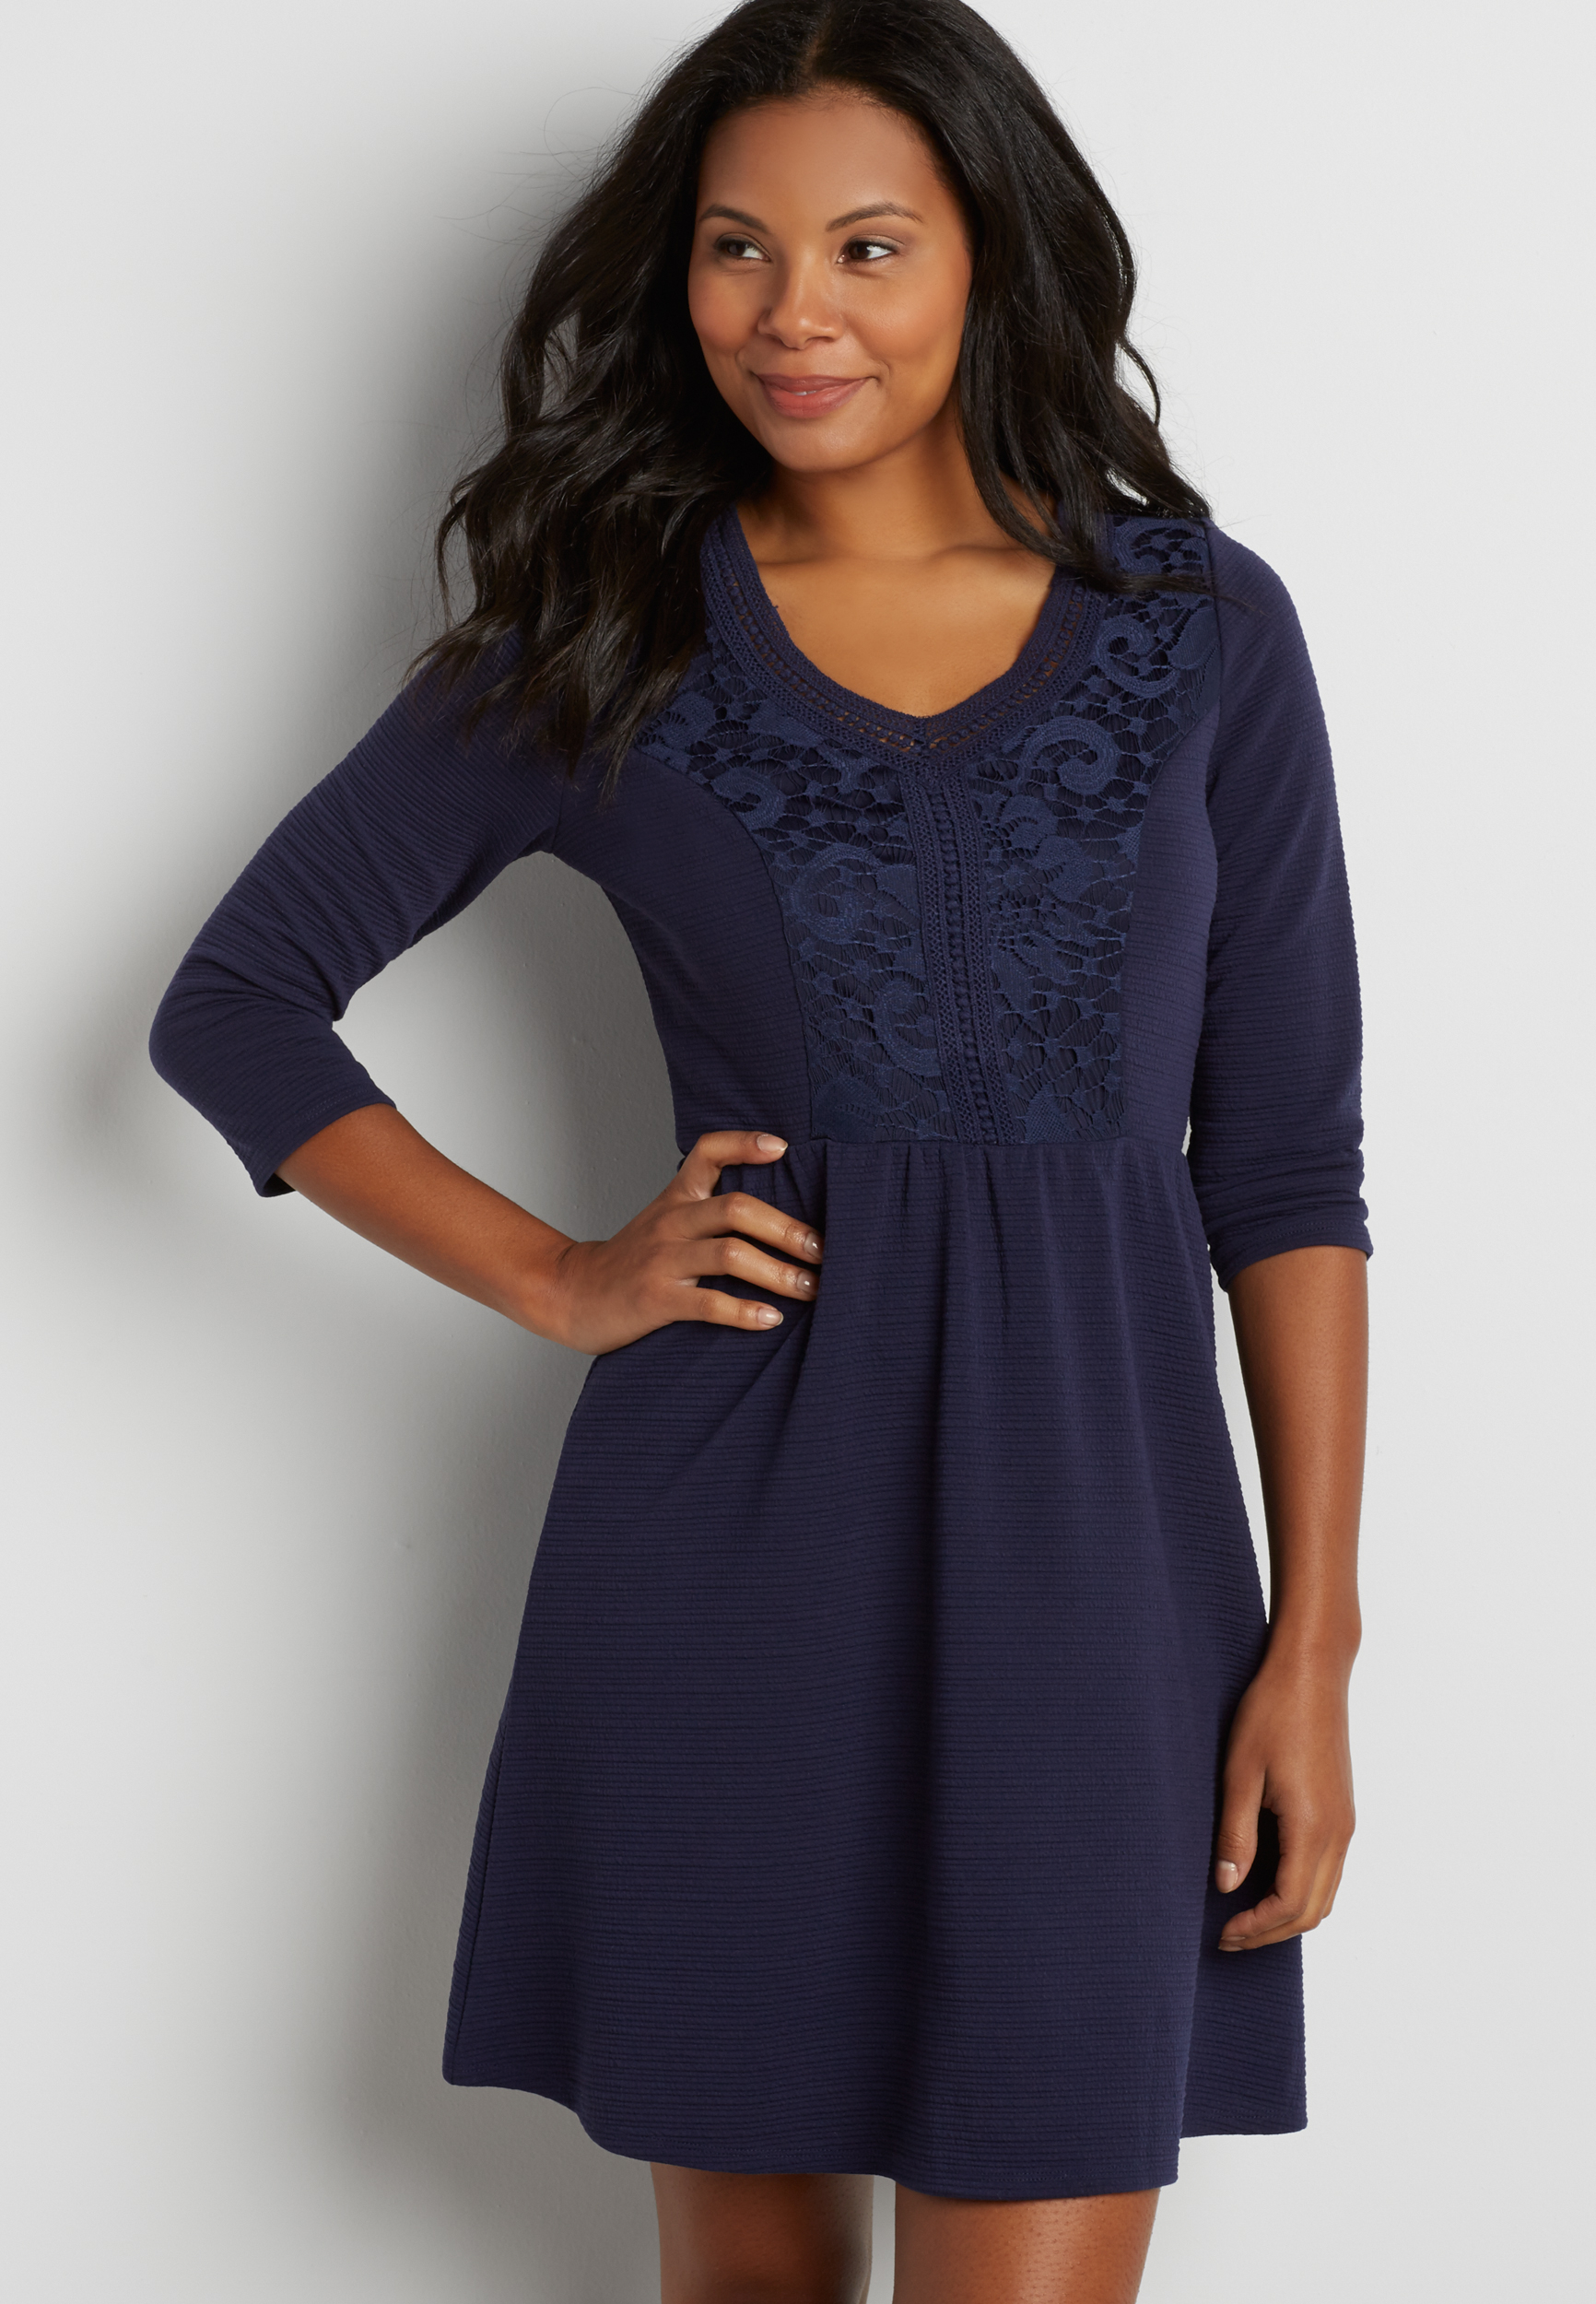 textured knit dress with lace overlay | maurices